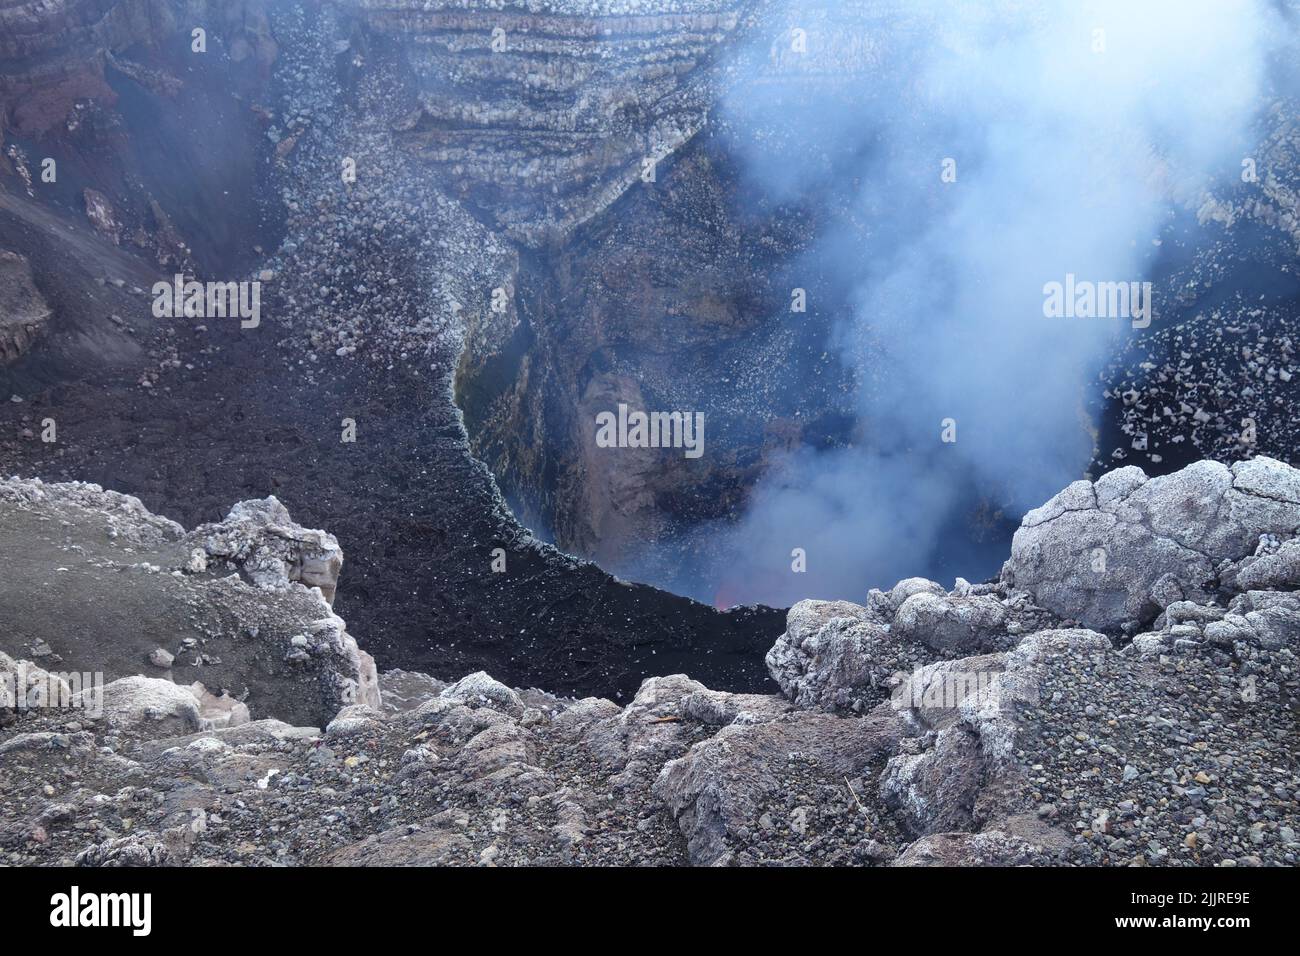 A high-angle shot of the stones at an active volcano with smoke. Stock Photo